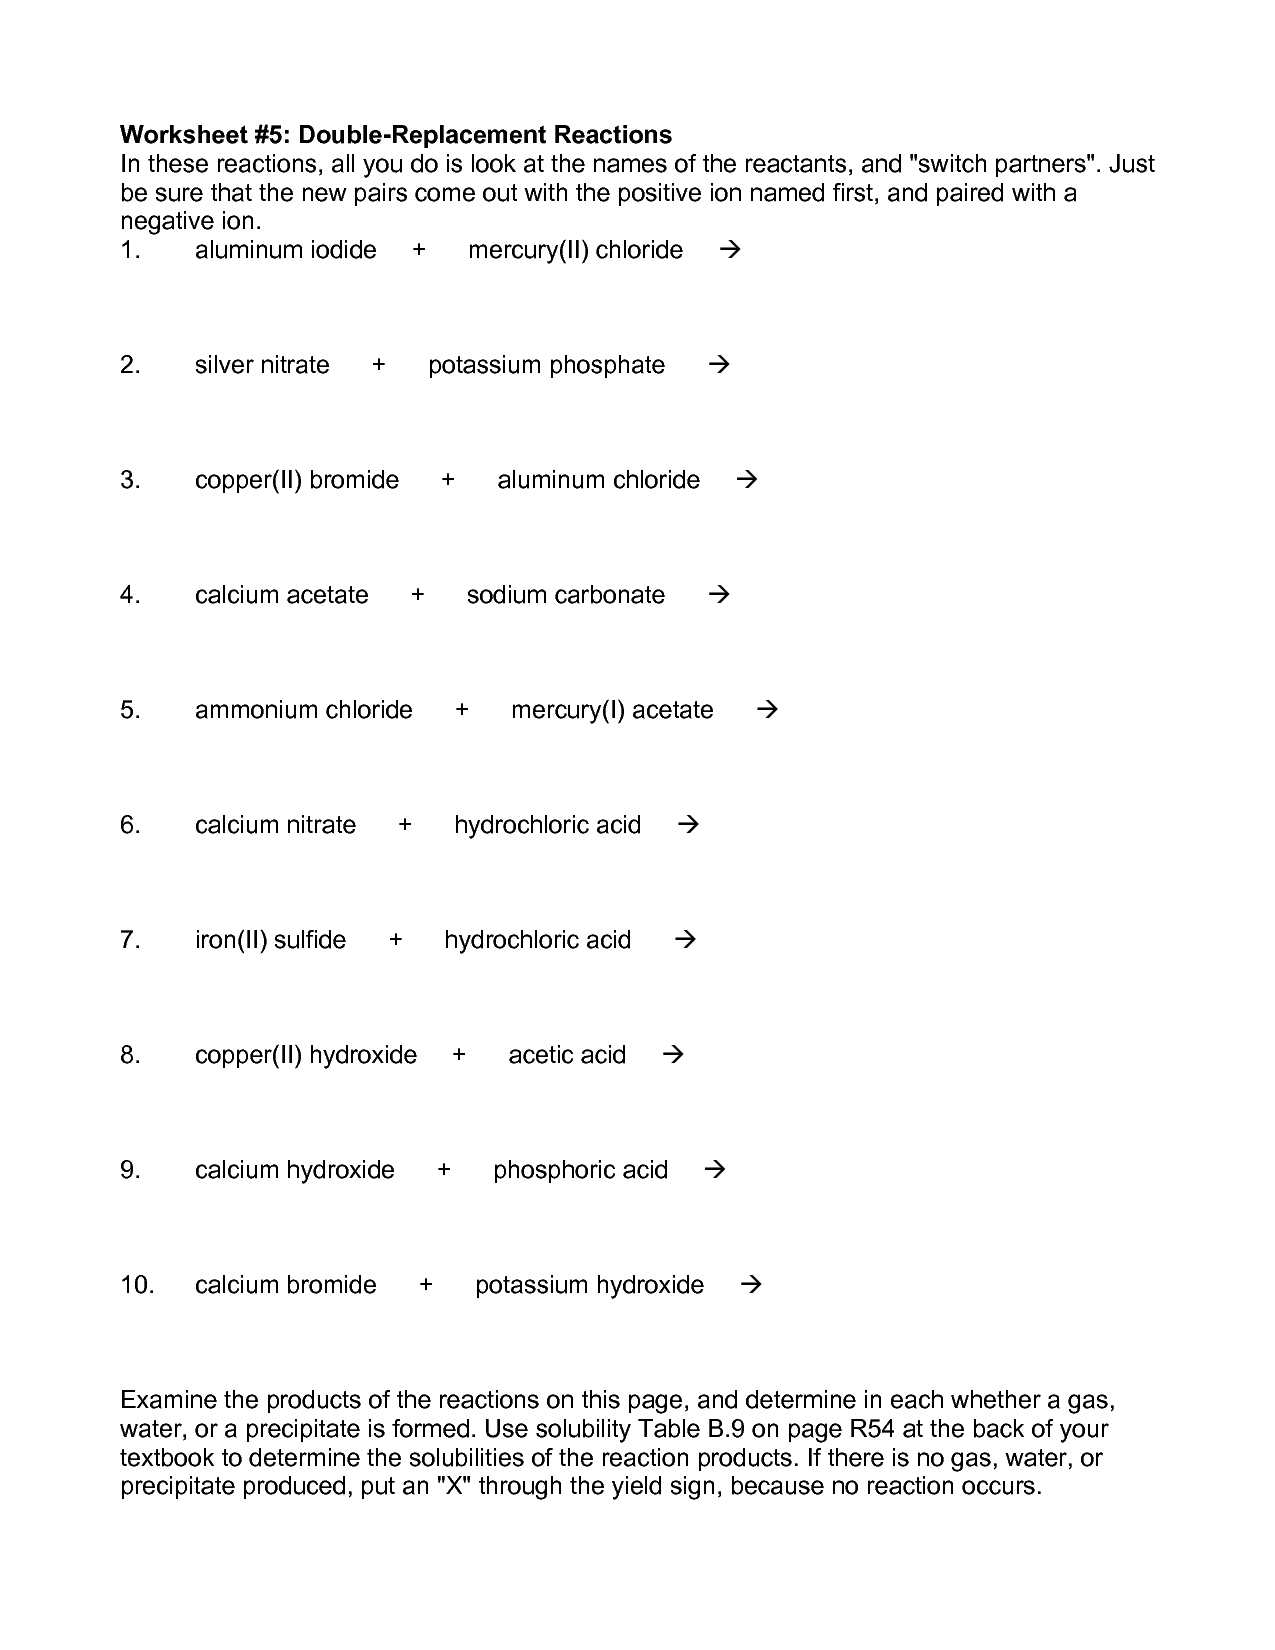 13-types-of-chemical-reactions-worksheet-answers-worksheeto